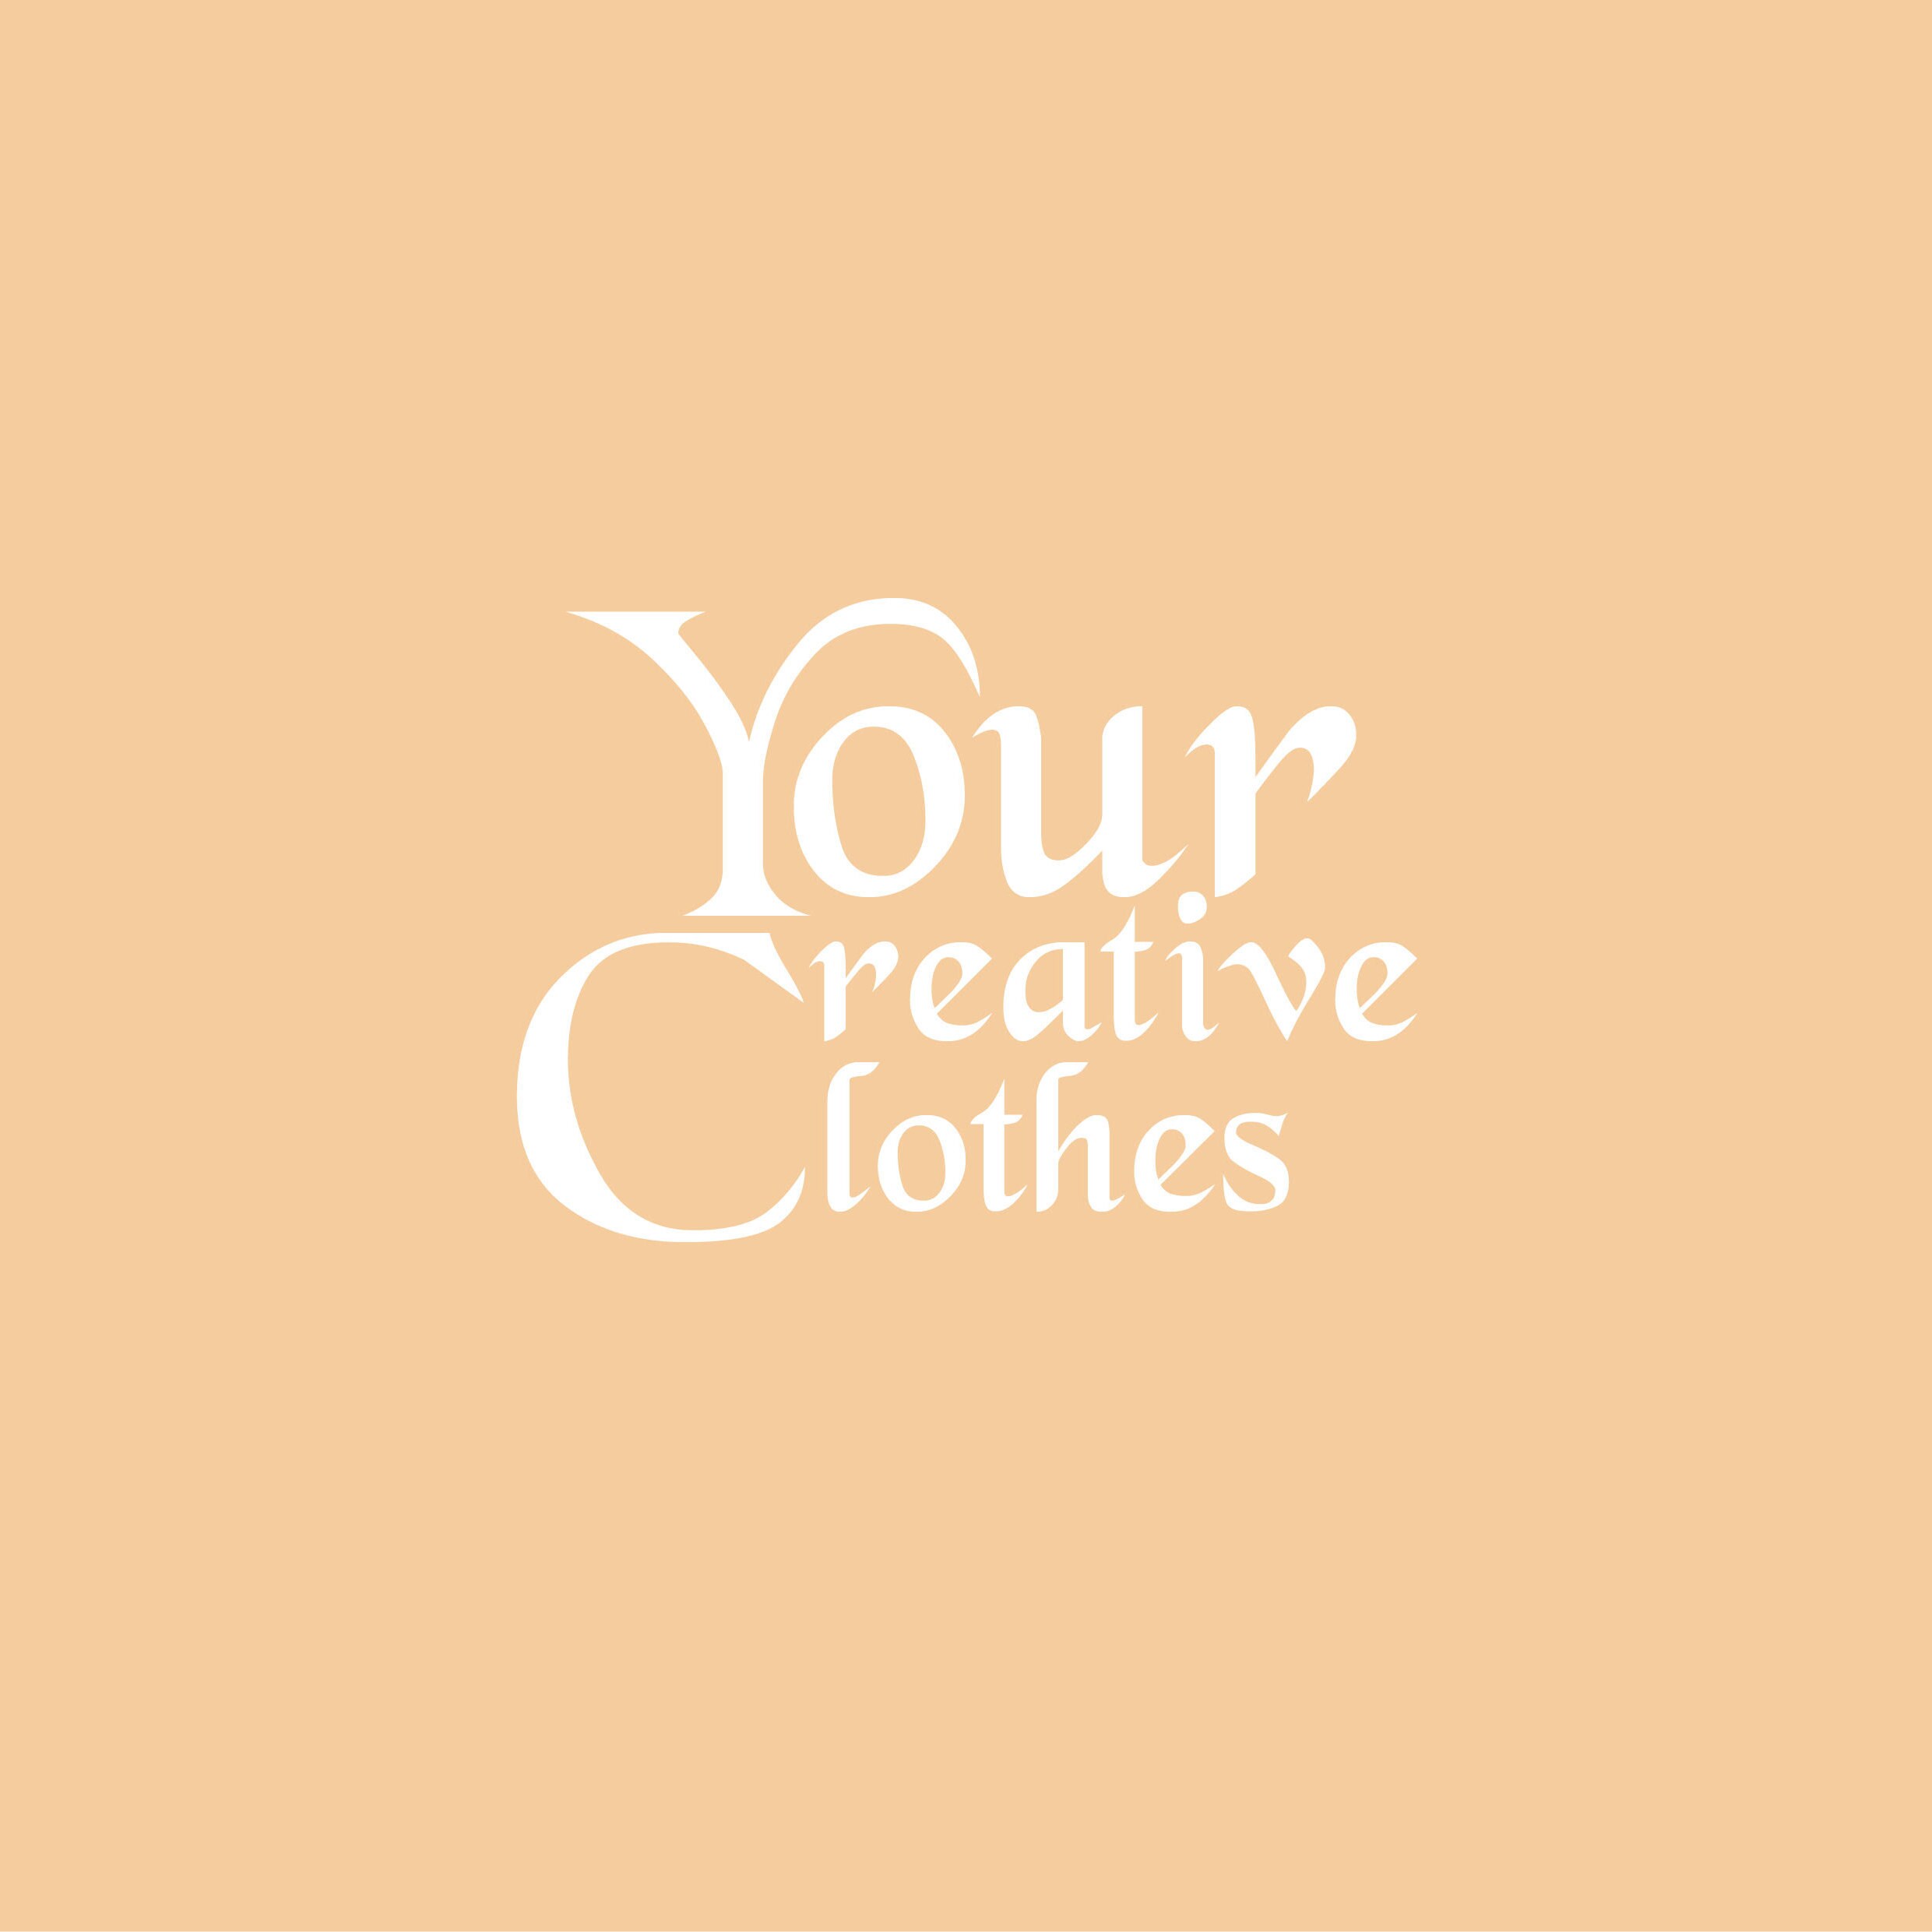 YourCreativeClothes - Etsy